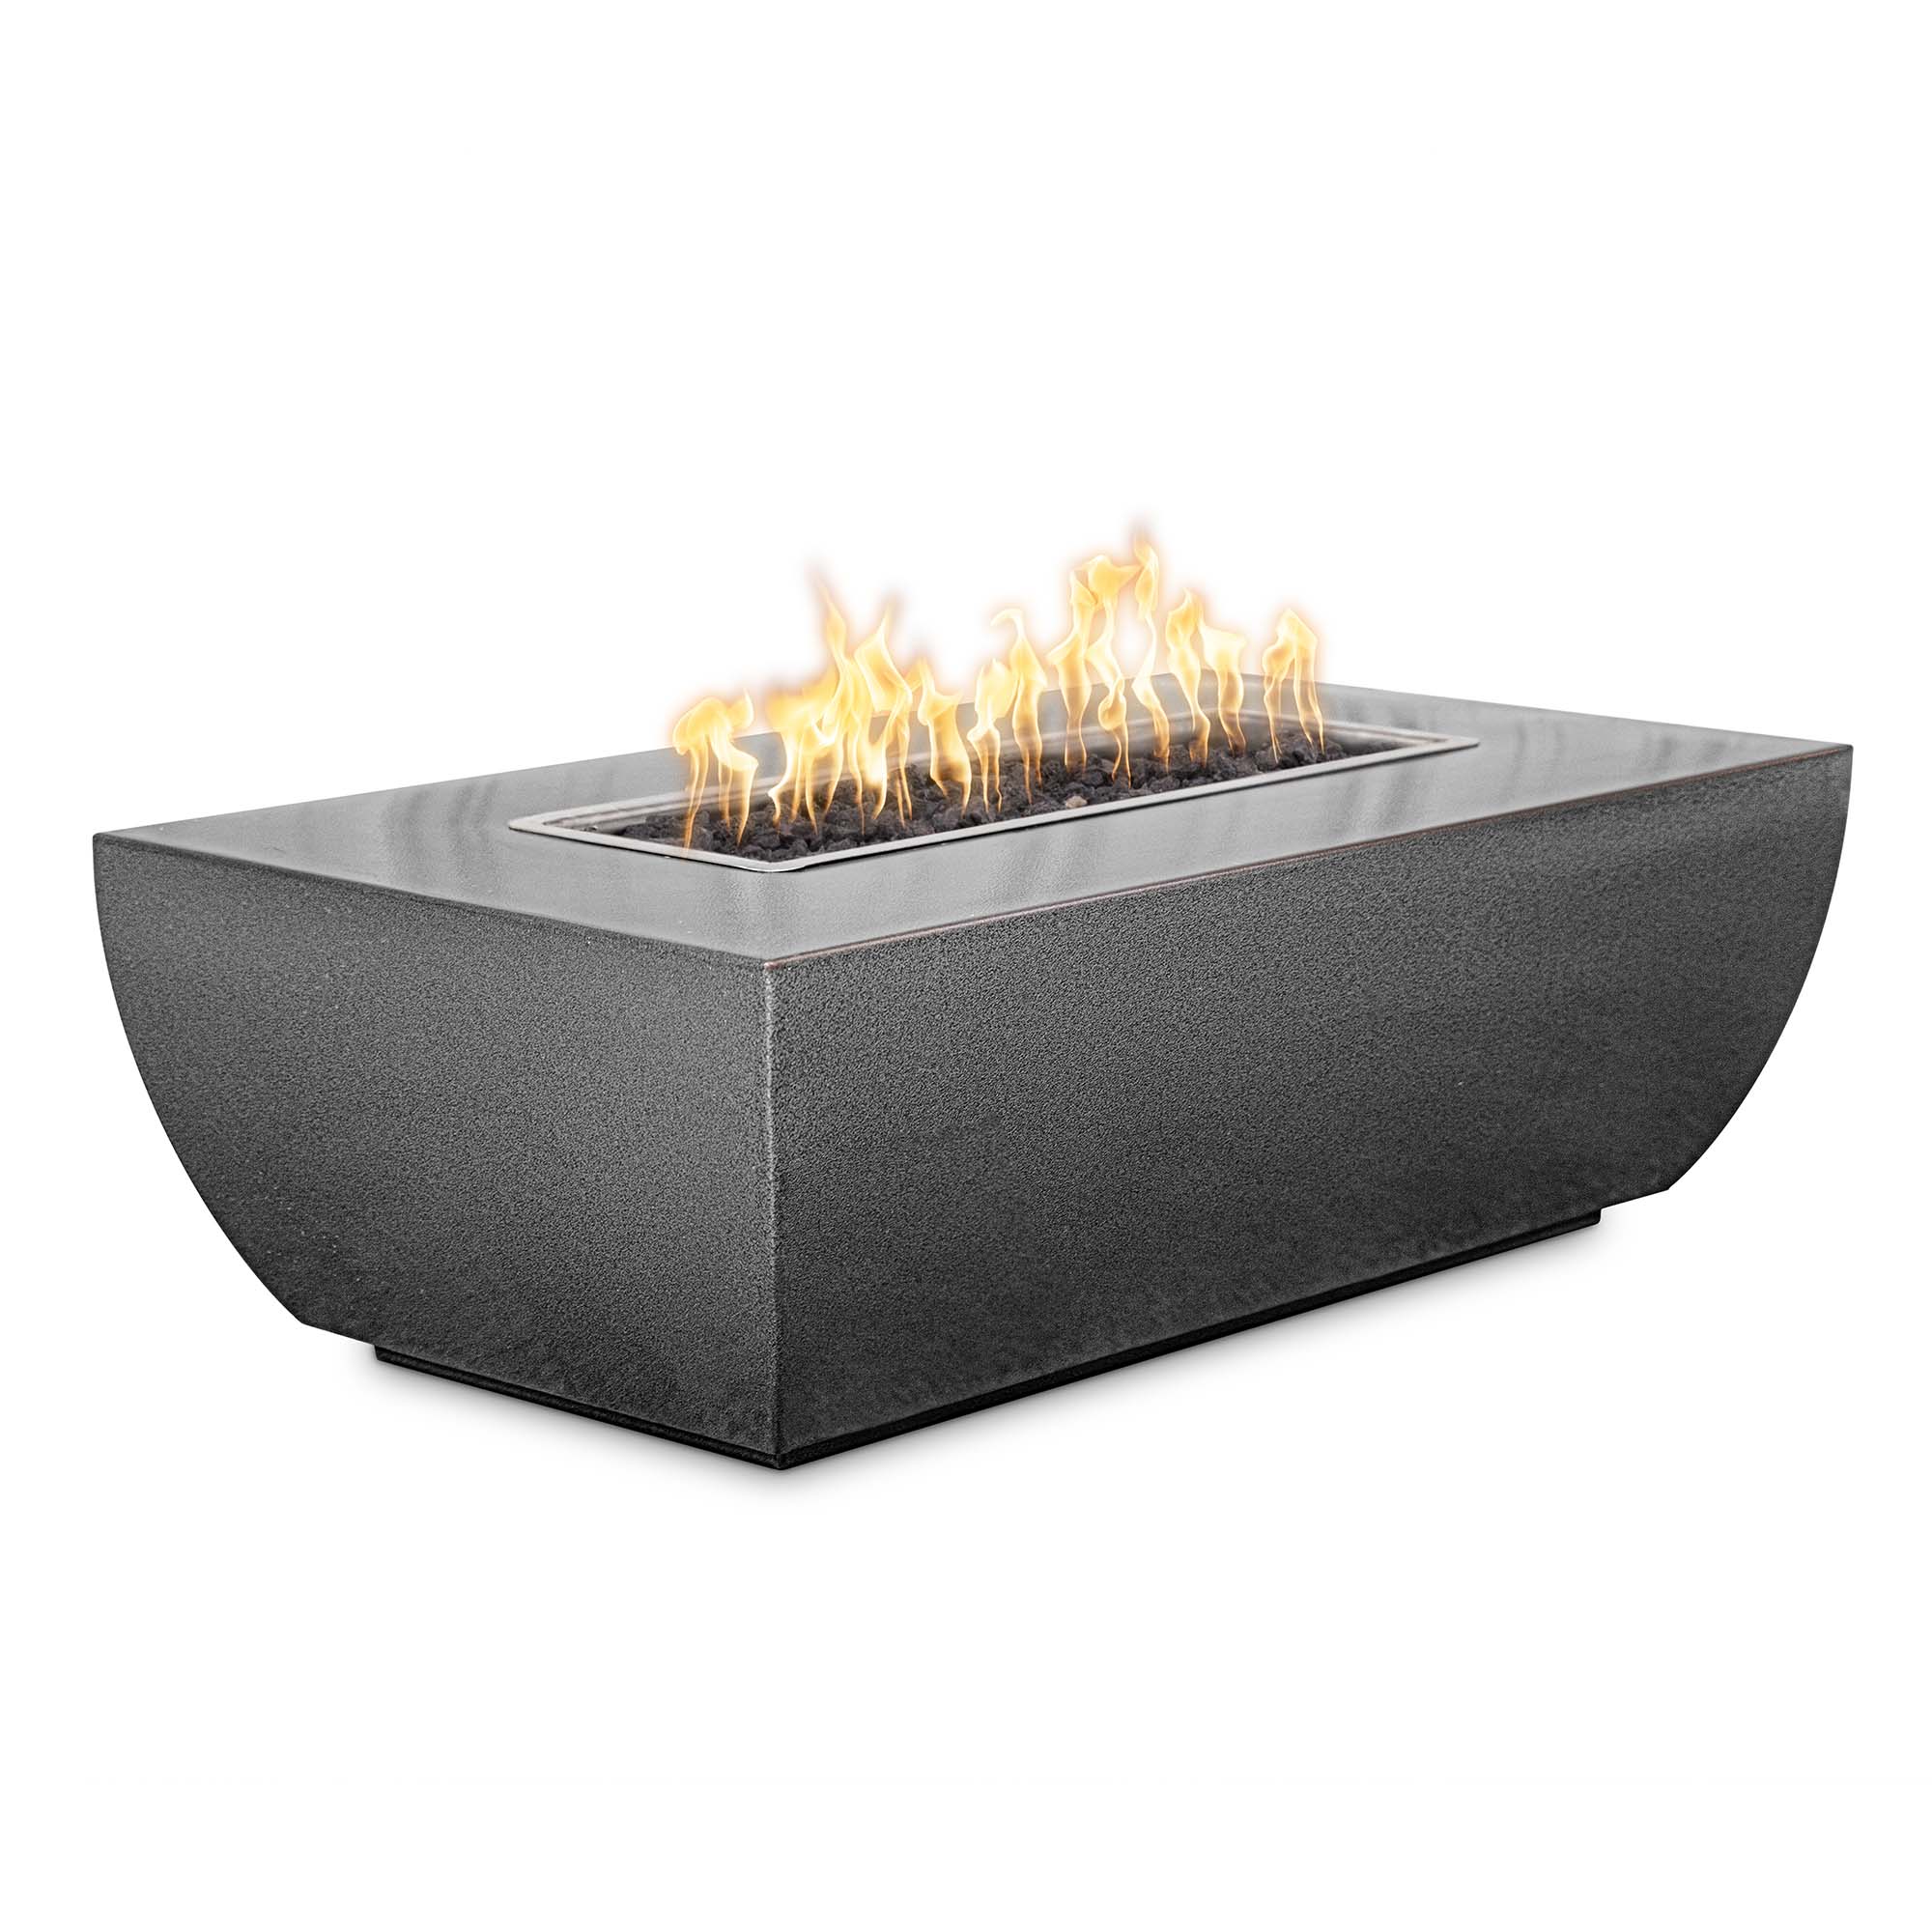 The Outdoor Plus Avalon Tall Fire Pit 48" Rectangular Powder Coated Metal Match Lit with Flame Sense OPT-AVLPC4815FSML